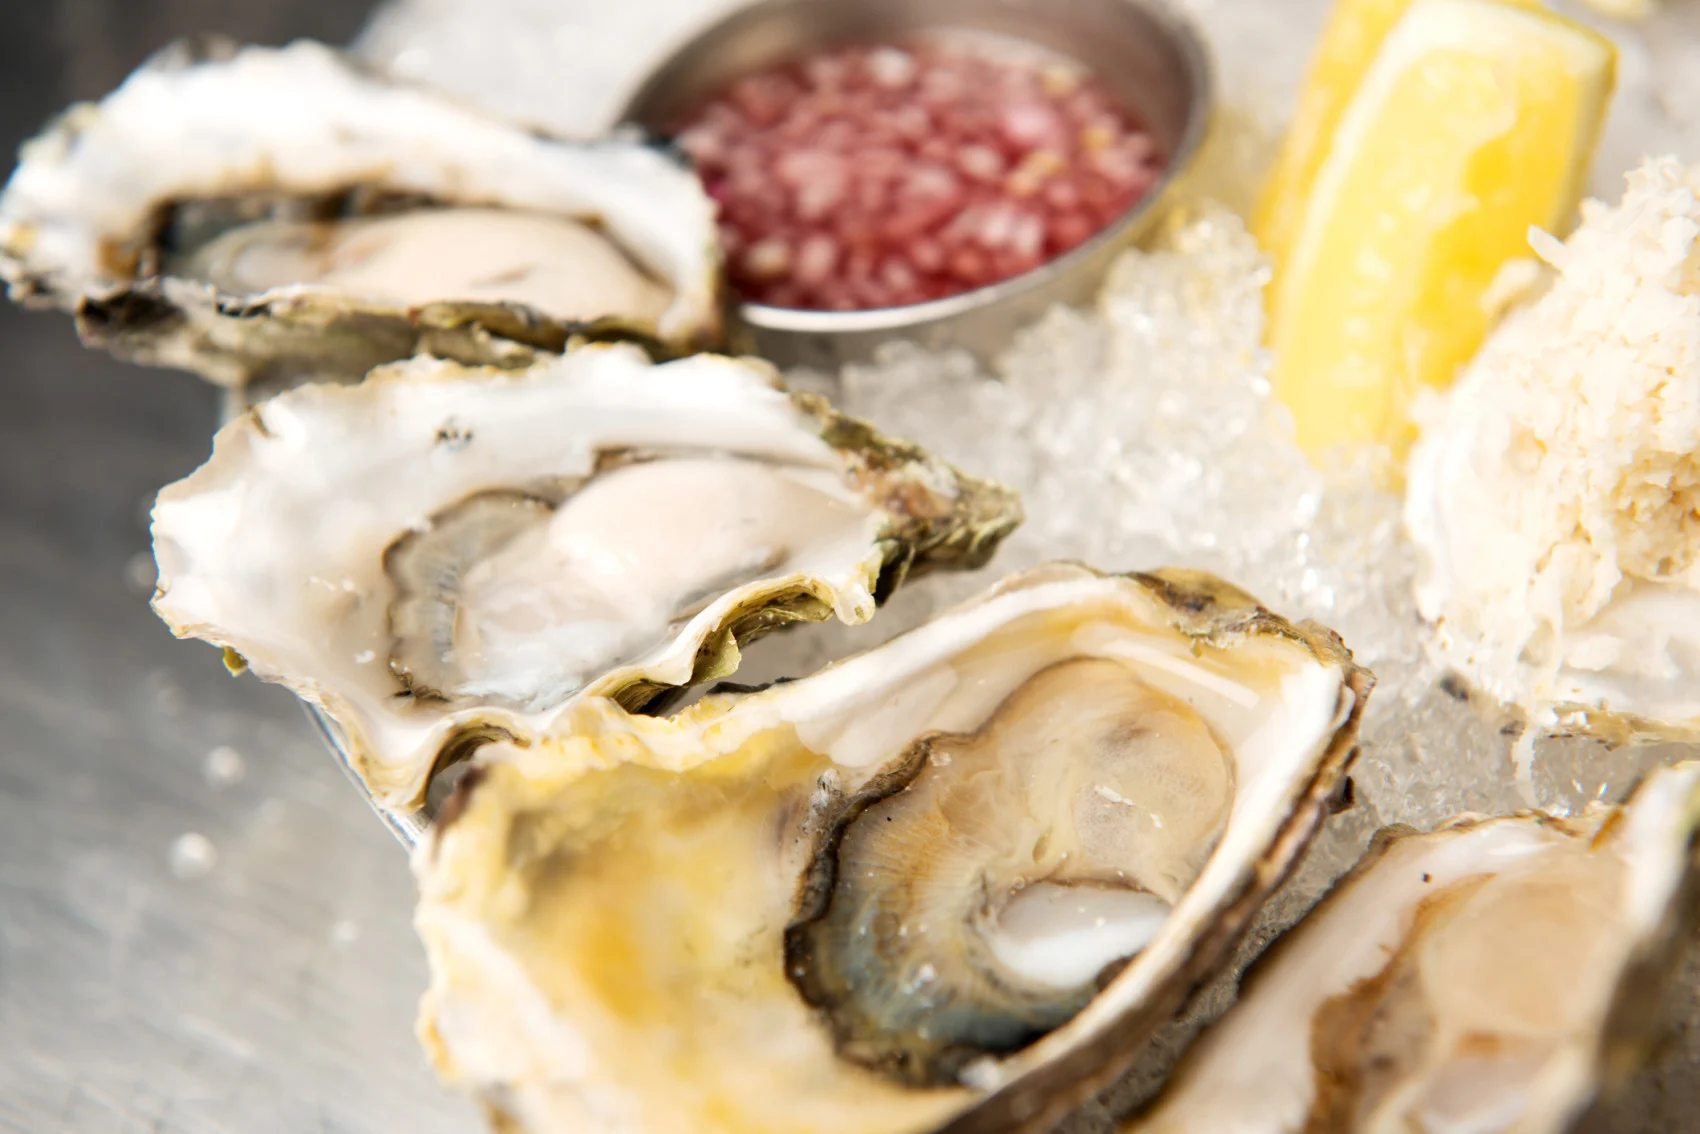 Oyster platter at Whistler's Bearfoot Bistro restaurant in Whistler, British Columbia. (David Buzzard/ Moment/ Getty Images)